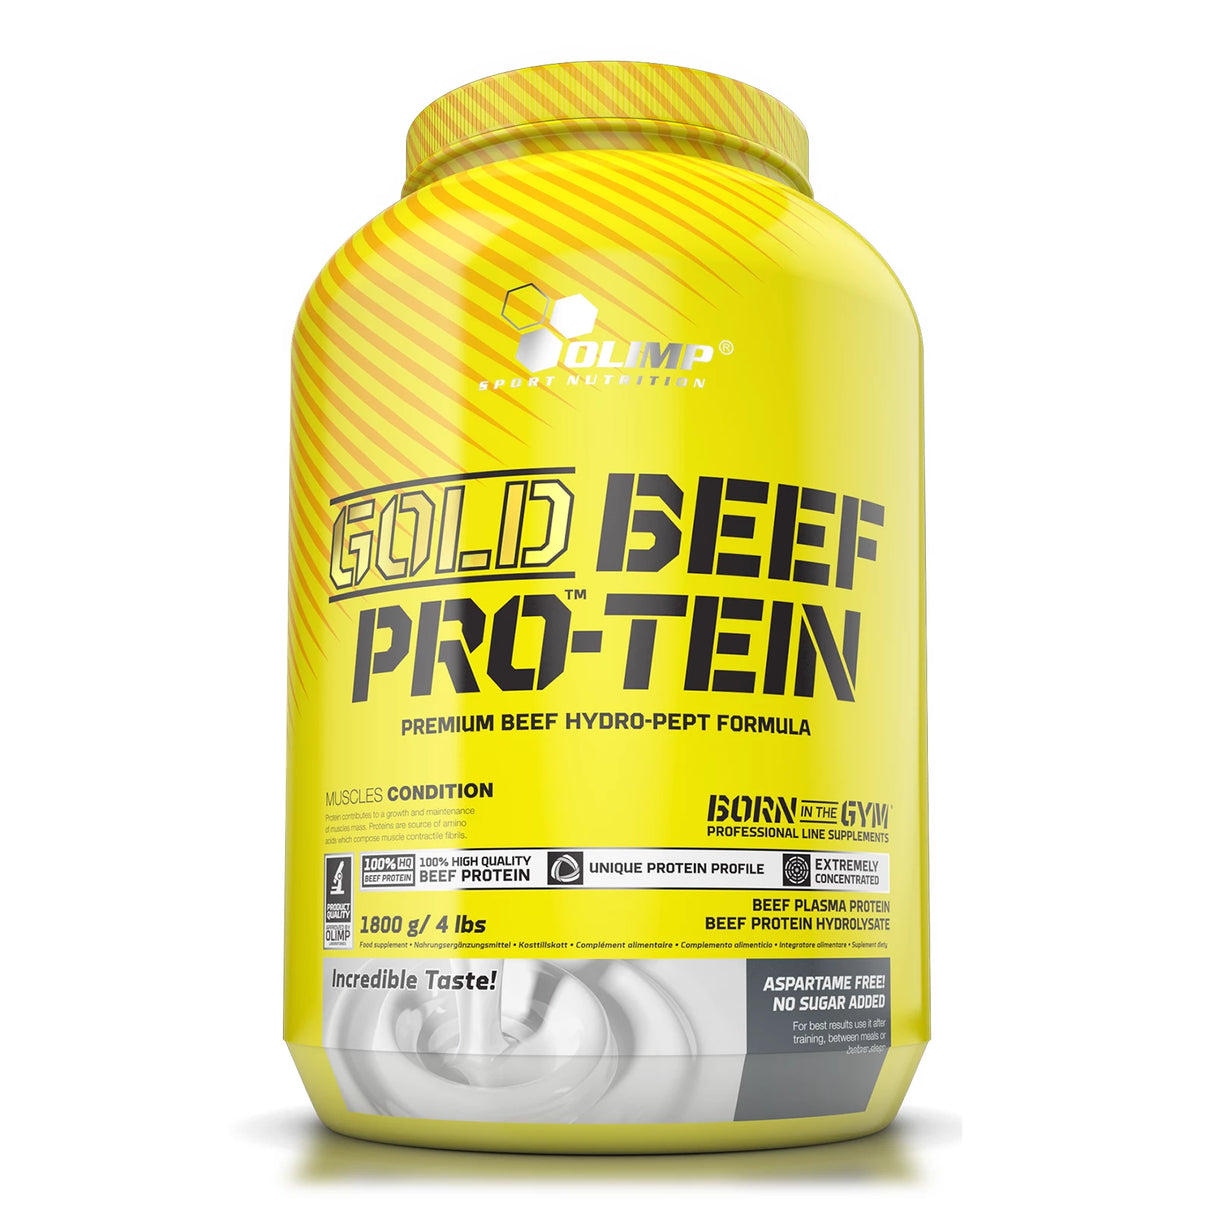 GOLD BEEF PRO-TEIN - 1800G Olimp Sport Nutrition